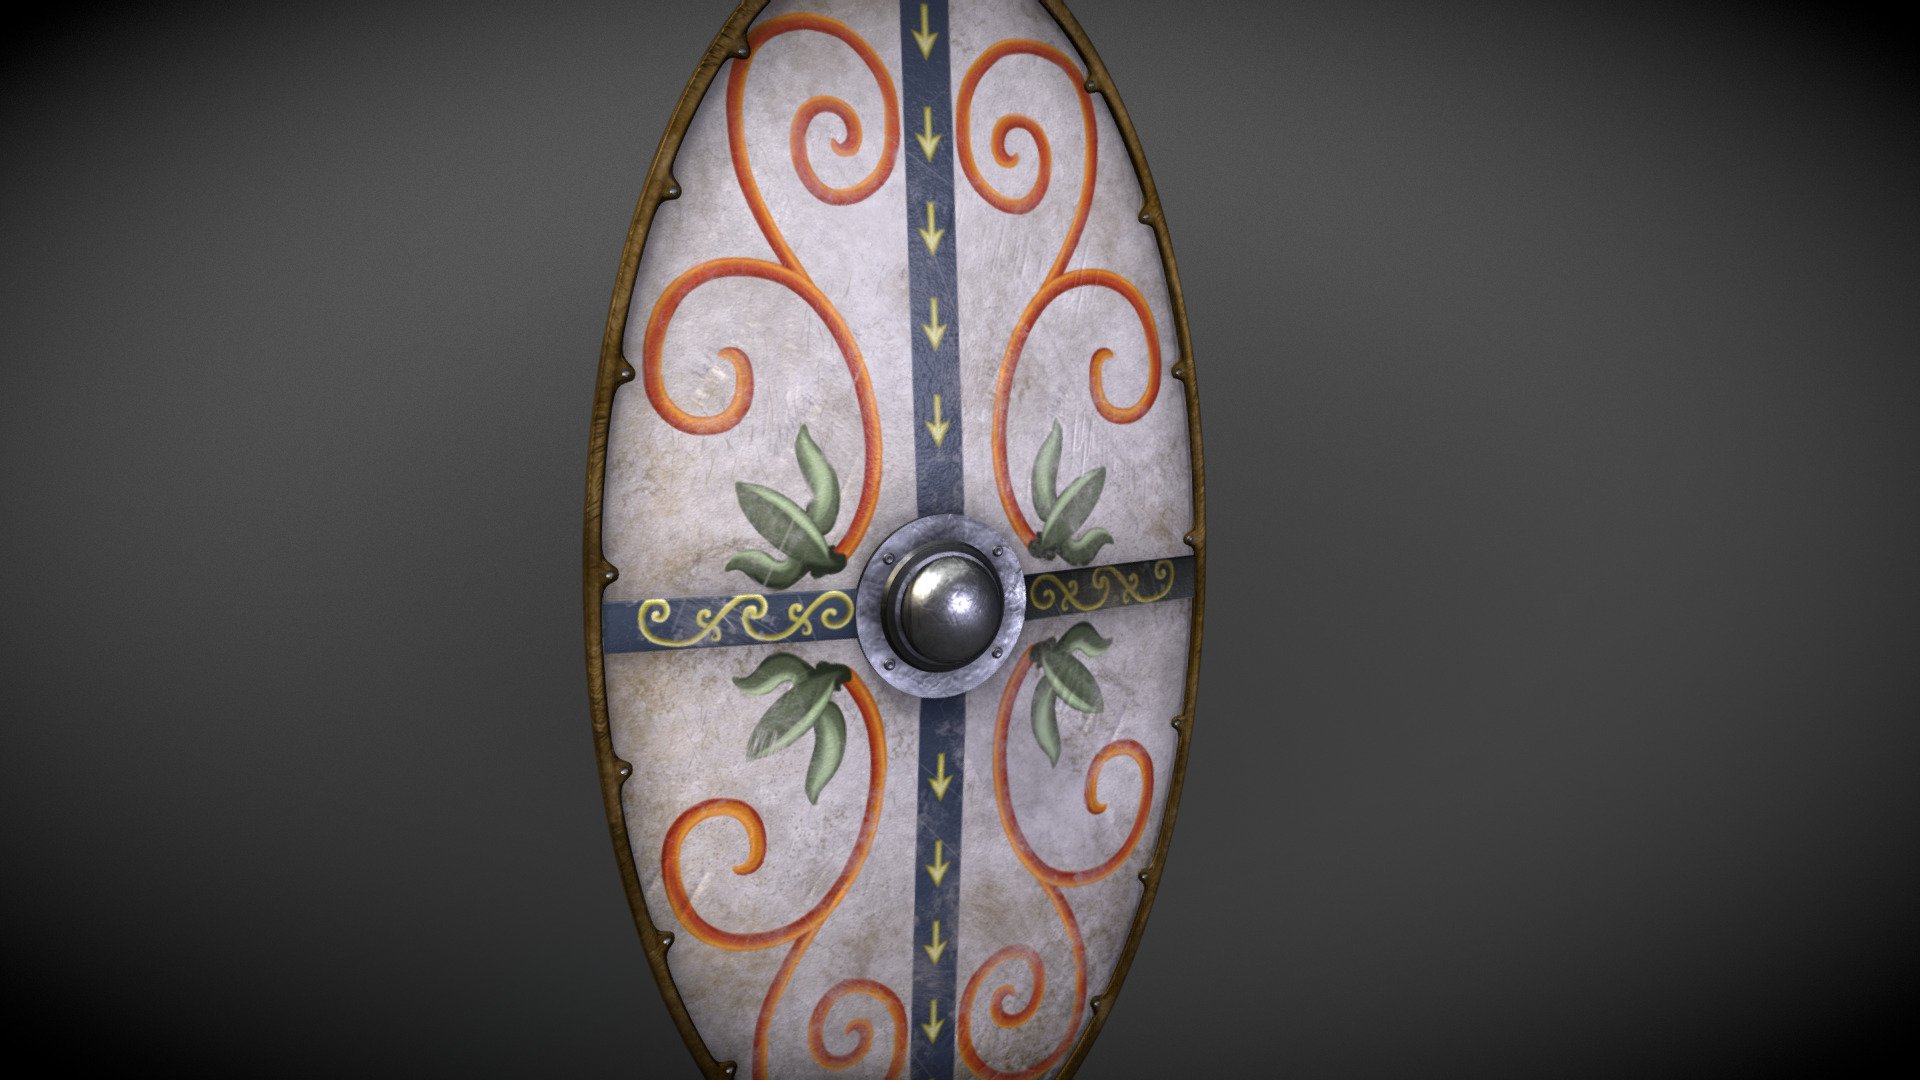 Dacian shield from 1st to 3rd century BC
Quad High Poly Mesh PBR textures Modelled in Blender 2.79 and textured in Substance Painter Also available .obj format in .zip file including textures - Dacian shield / Escudo dacio - Buy Royalty Free 3D model by La Sibila (@LaSibilaS.L.) 3d model